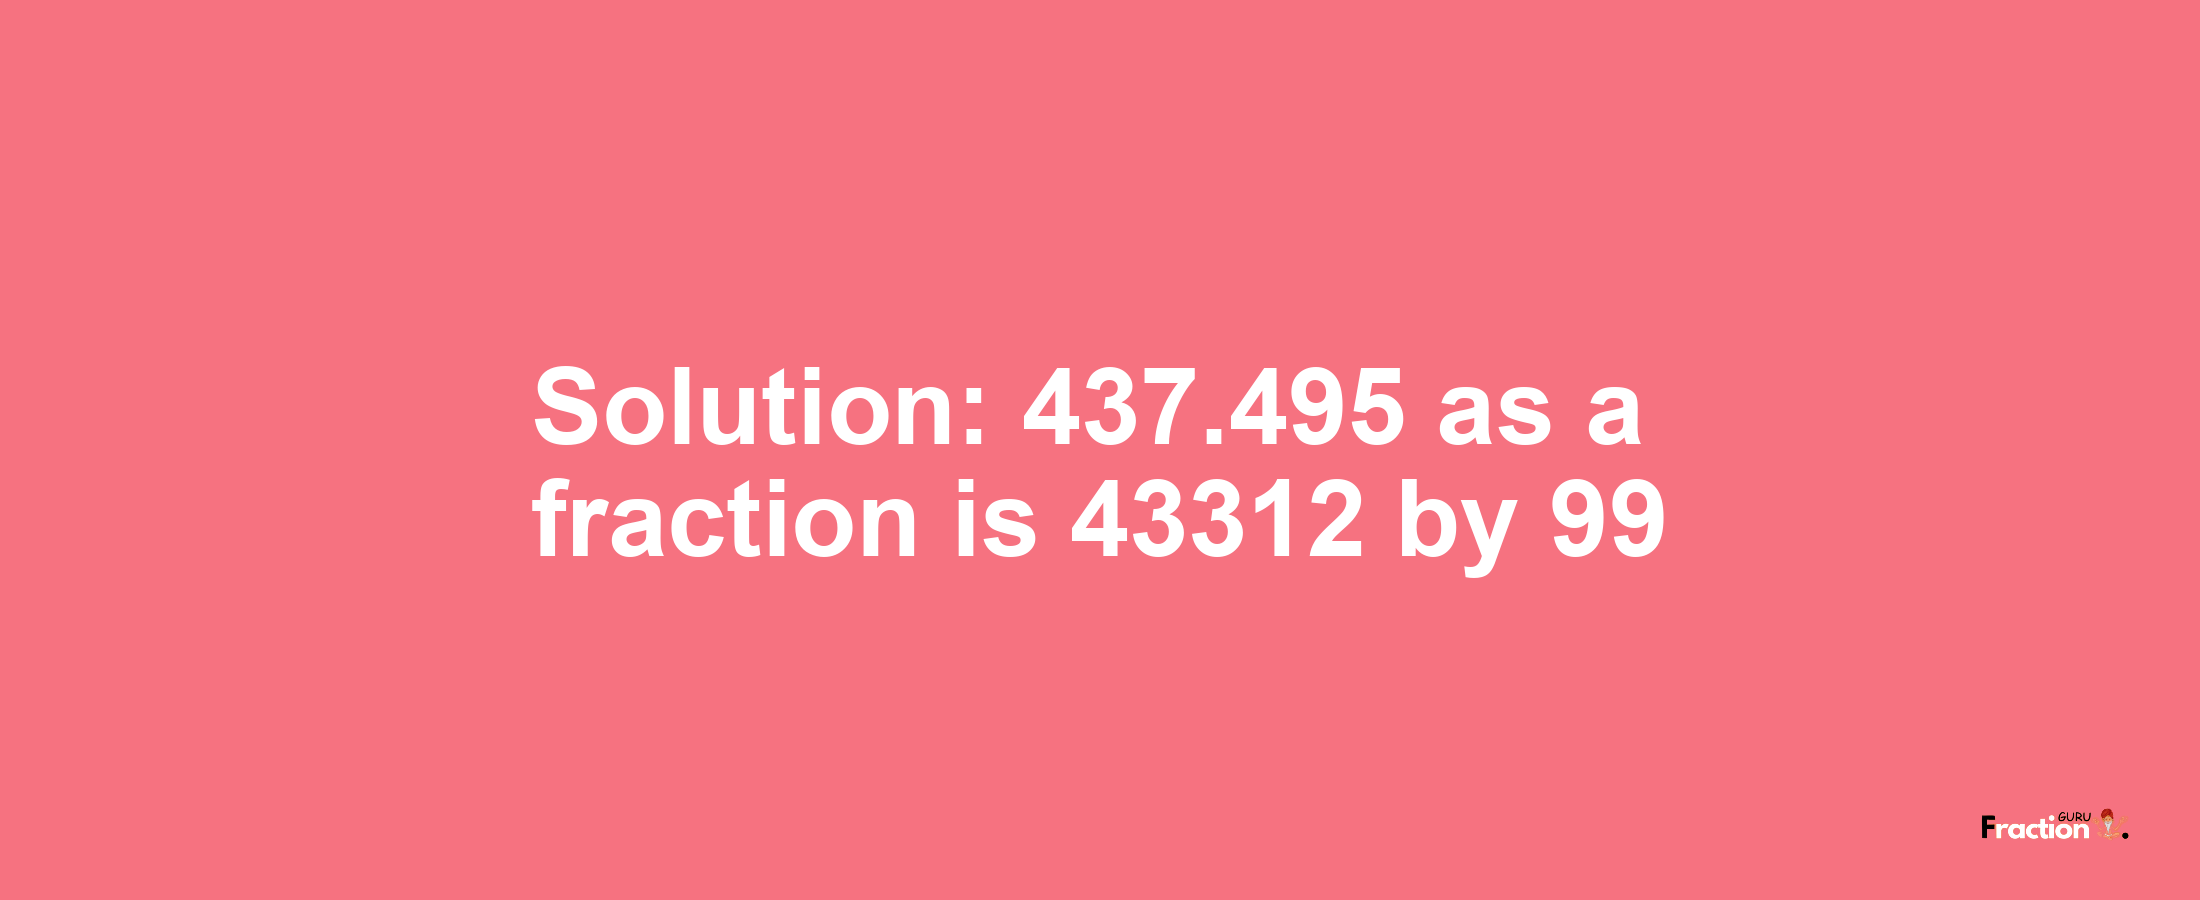 Solution:437.495 as a fraction is 43312/99